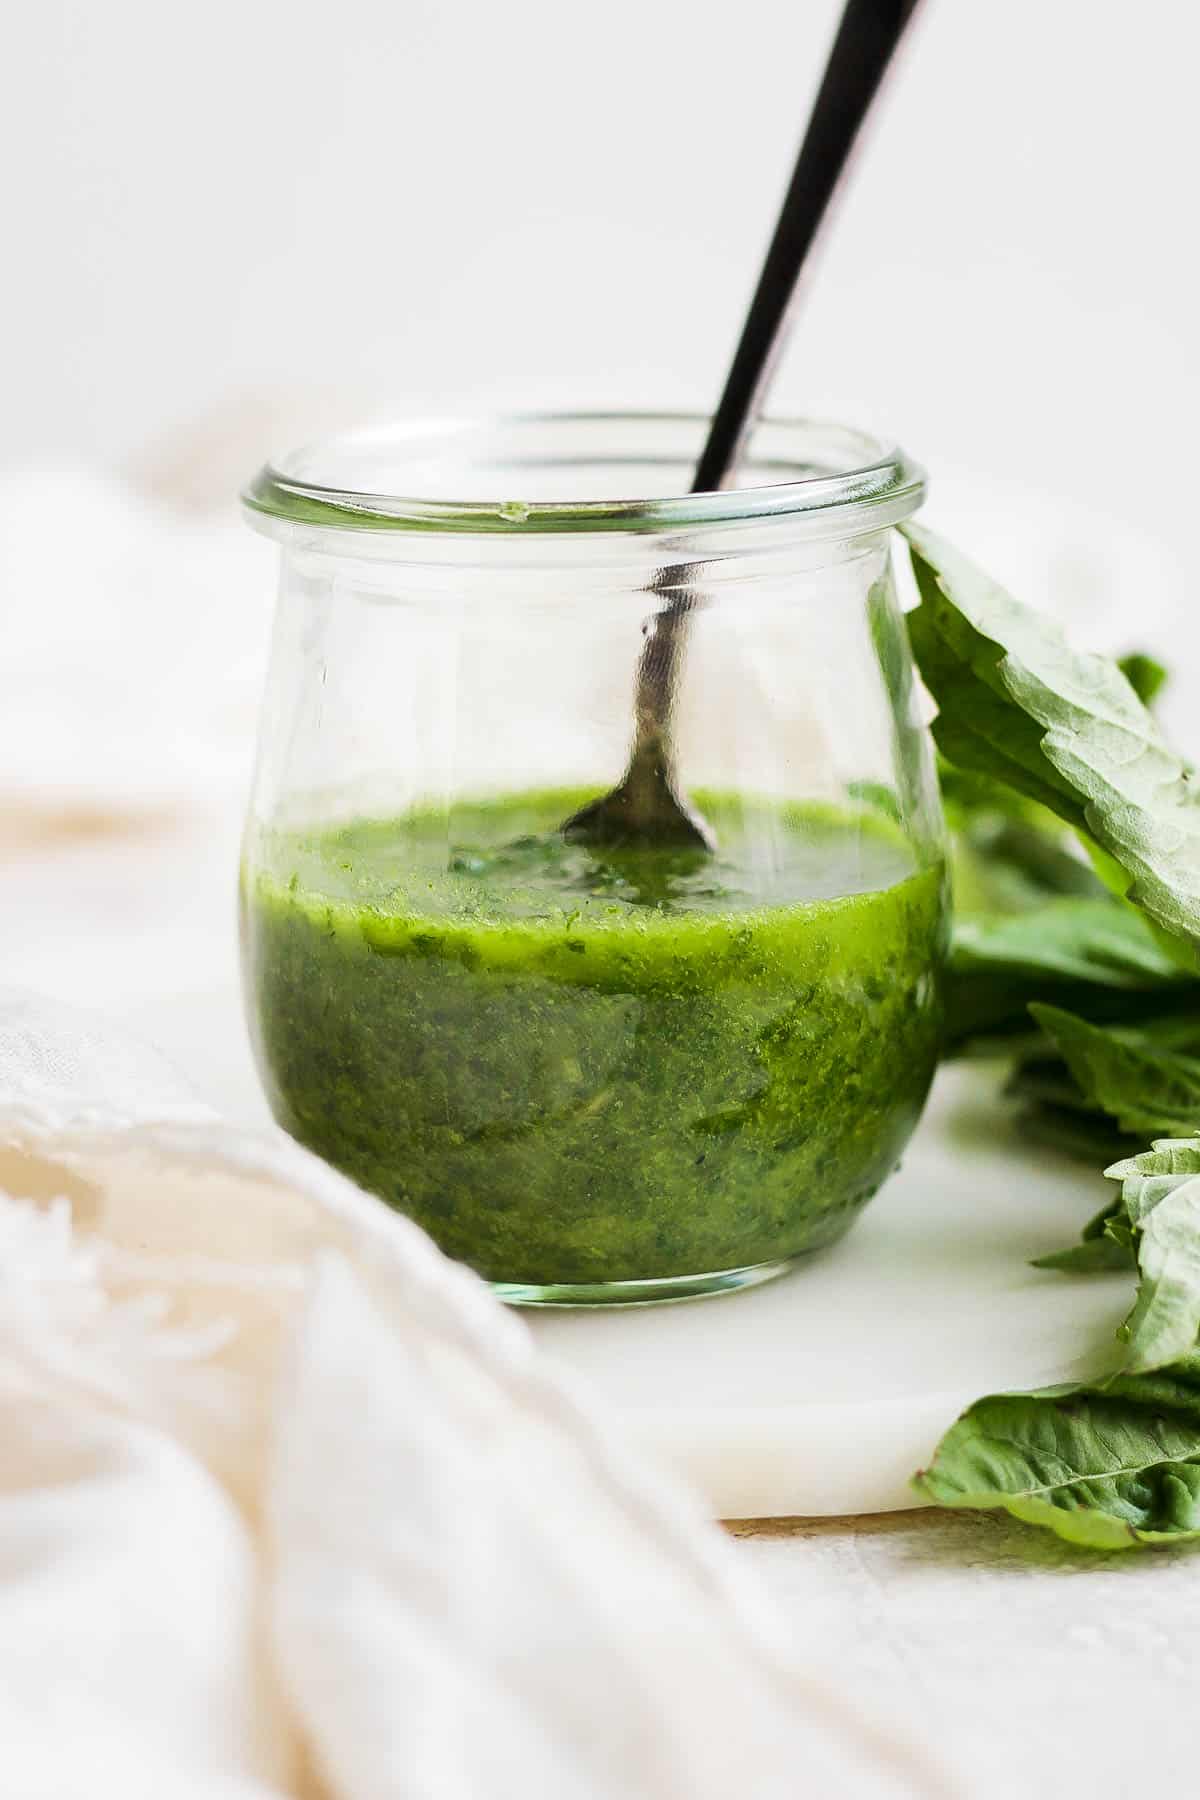 Basil vinaigrette in a small glass jar with a spoon.